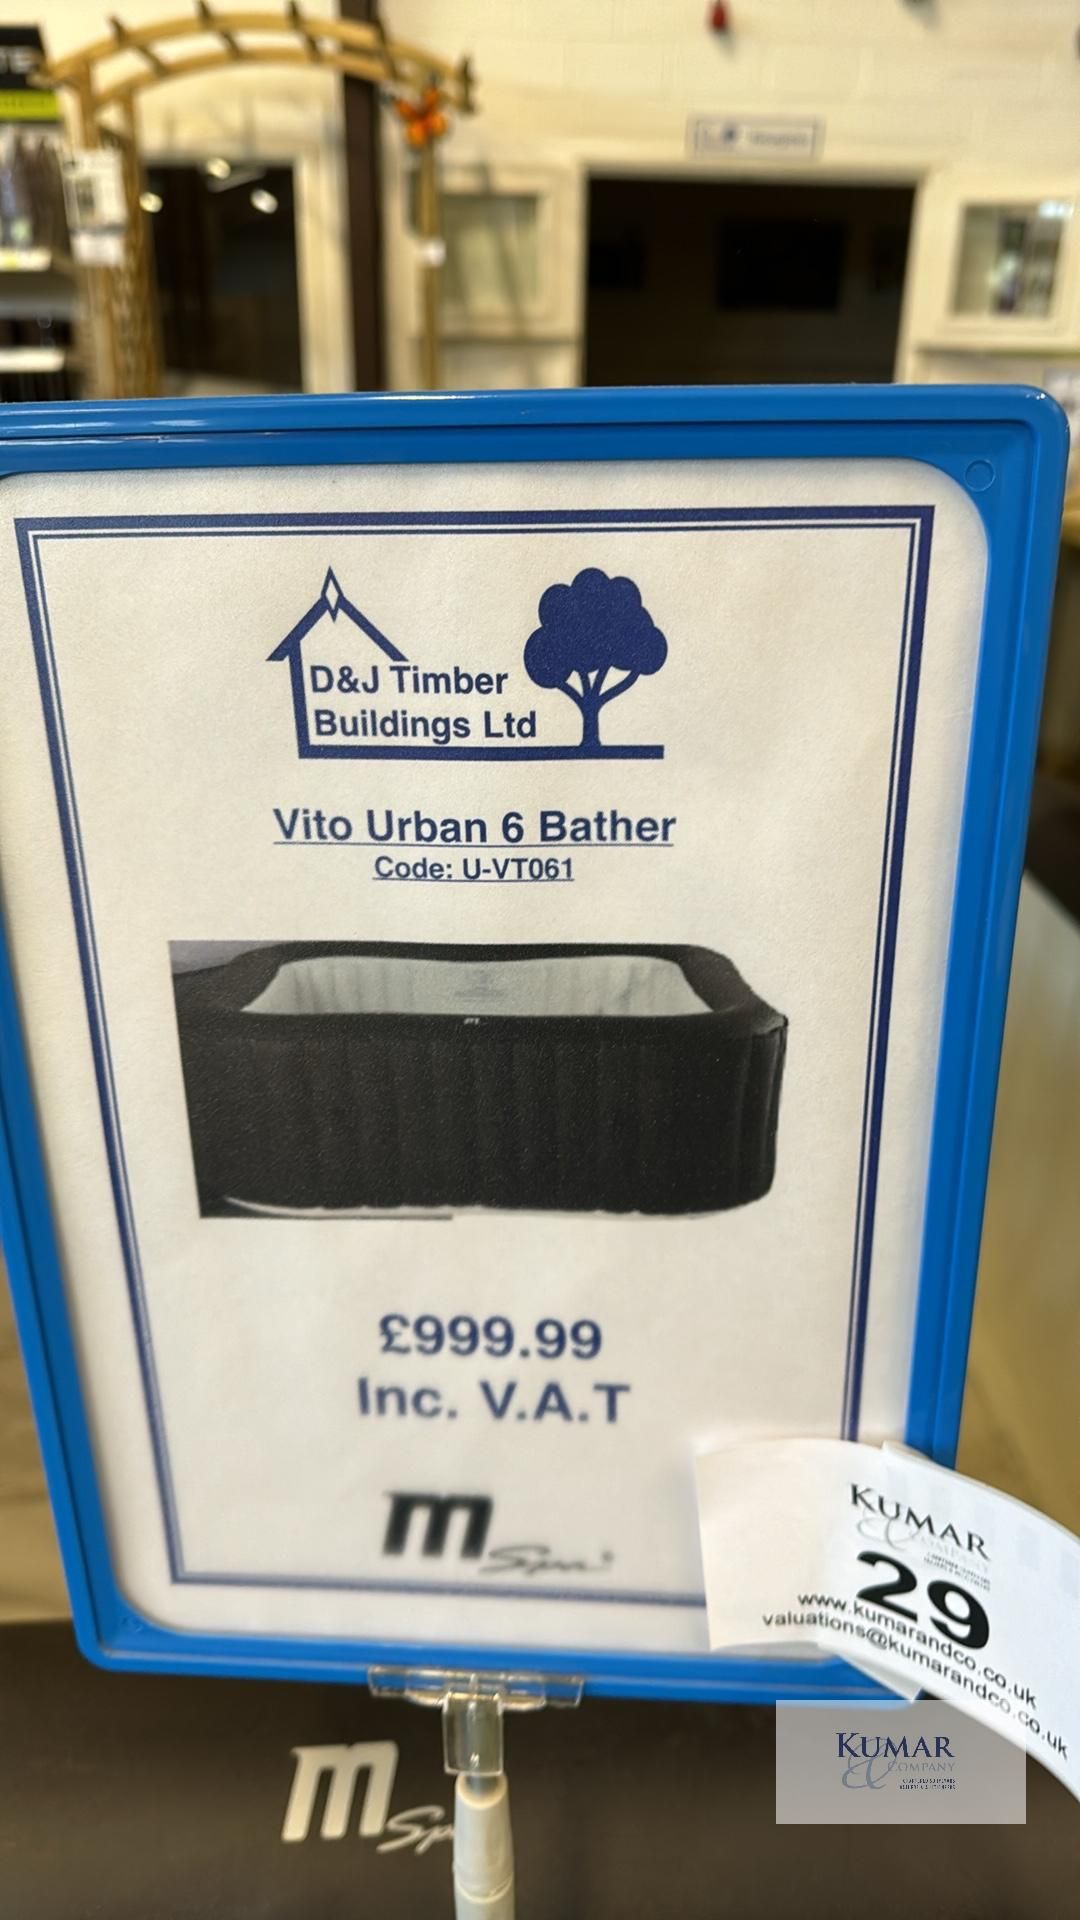 M Spa Vito Urban Series U- VT061 6 Bather Inflatable Spa Display Model Never Been Used with Box - Image 3 of 14